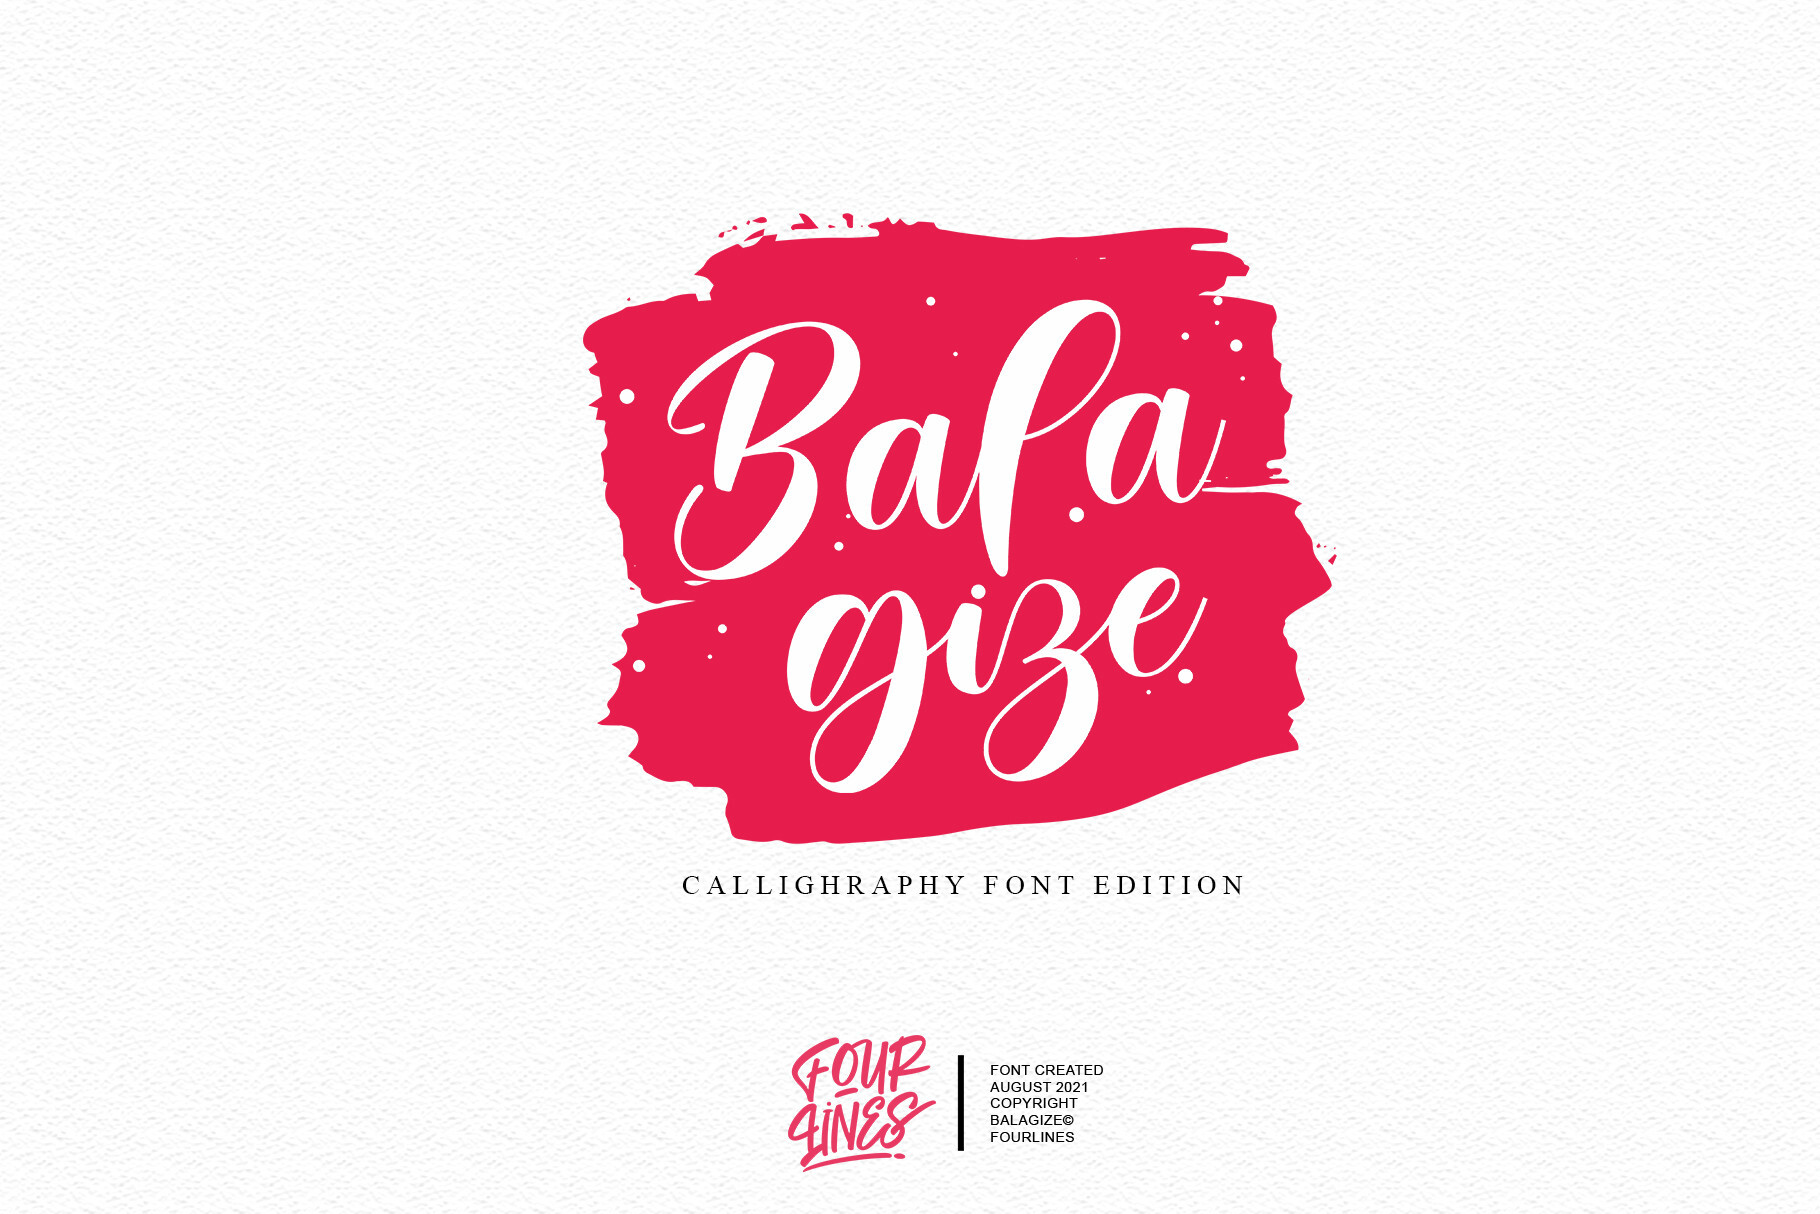 Preview and download Balagize font